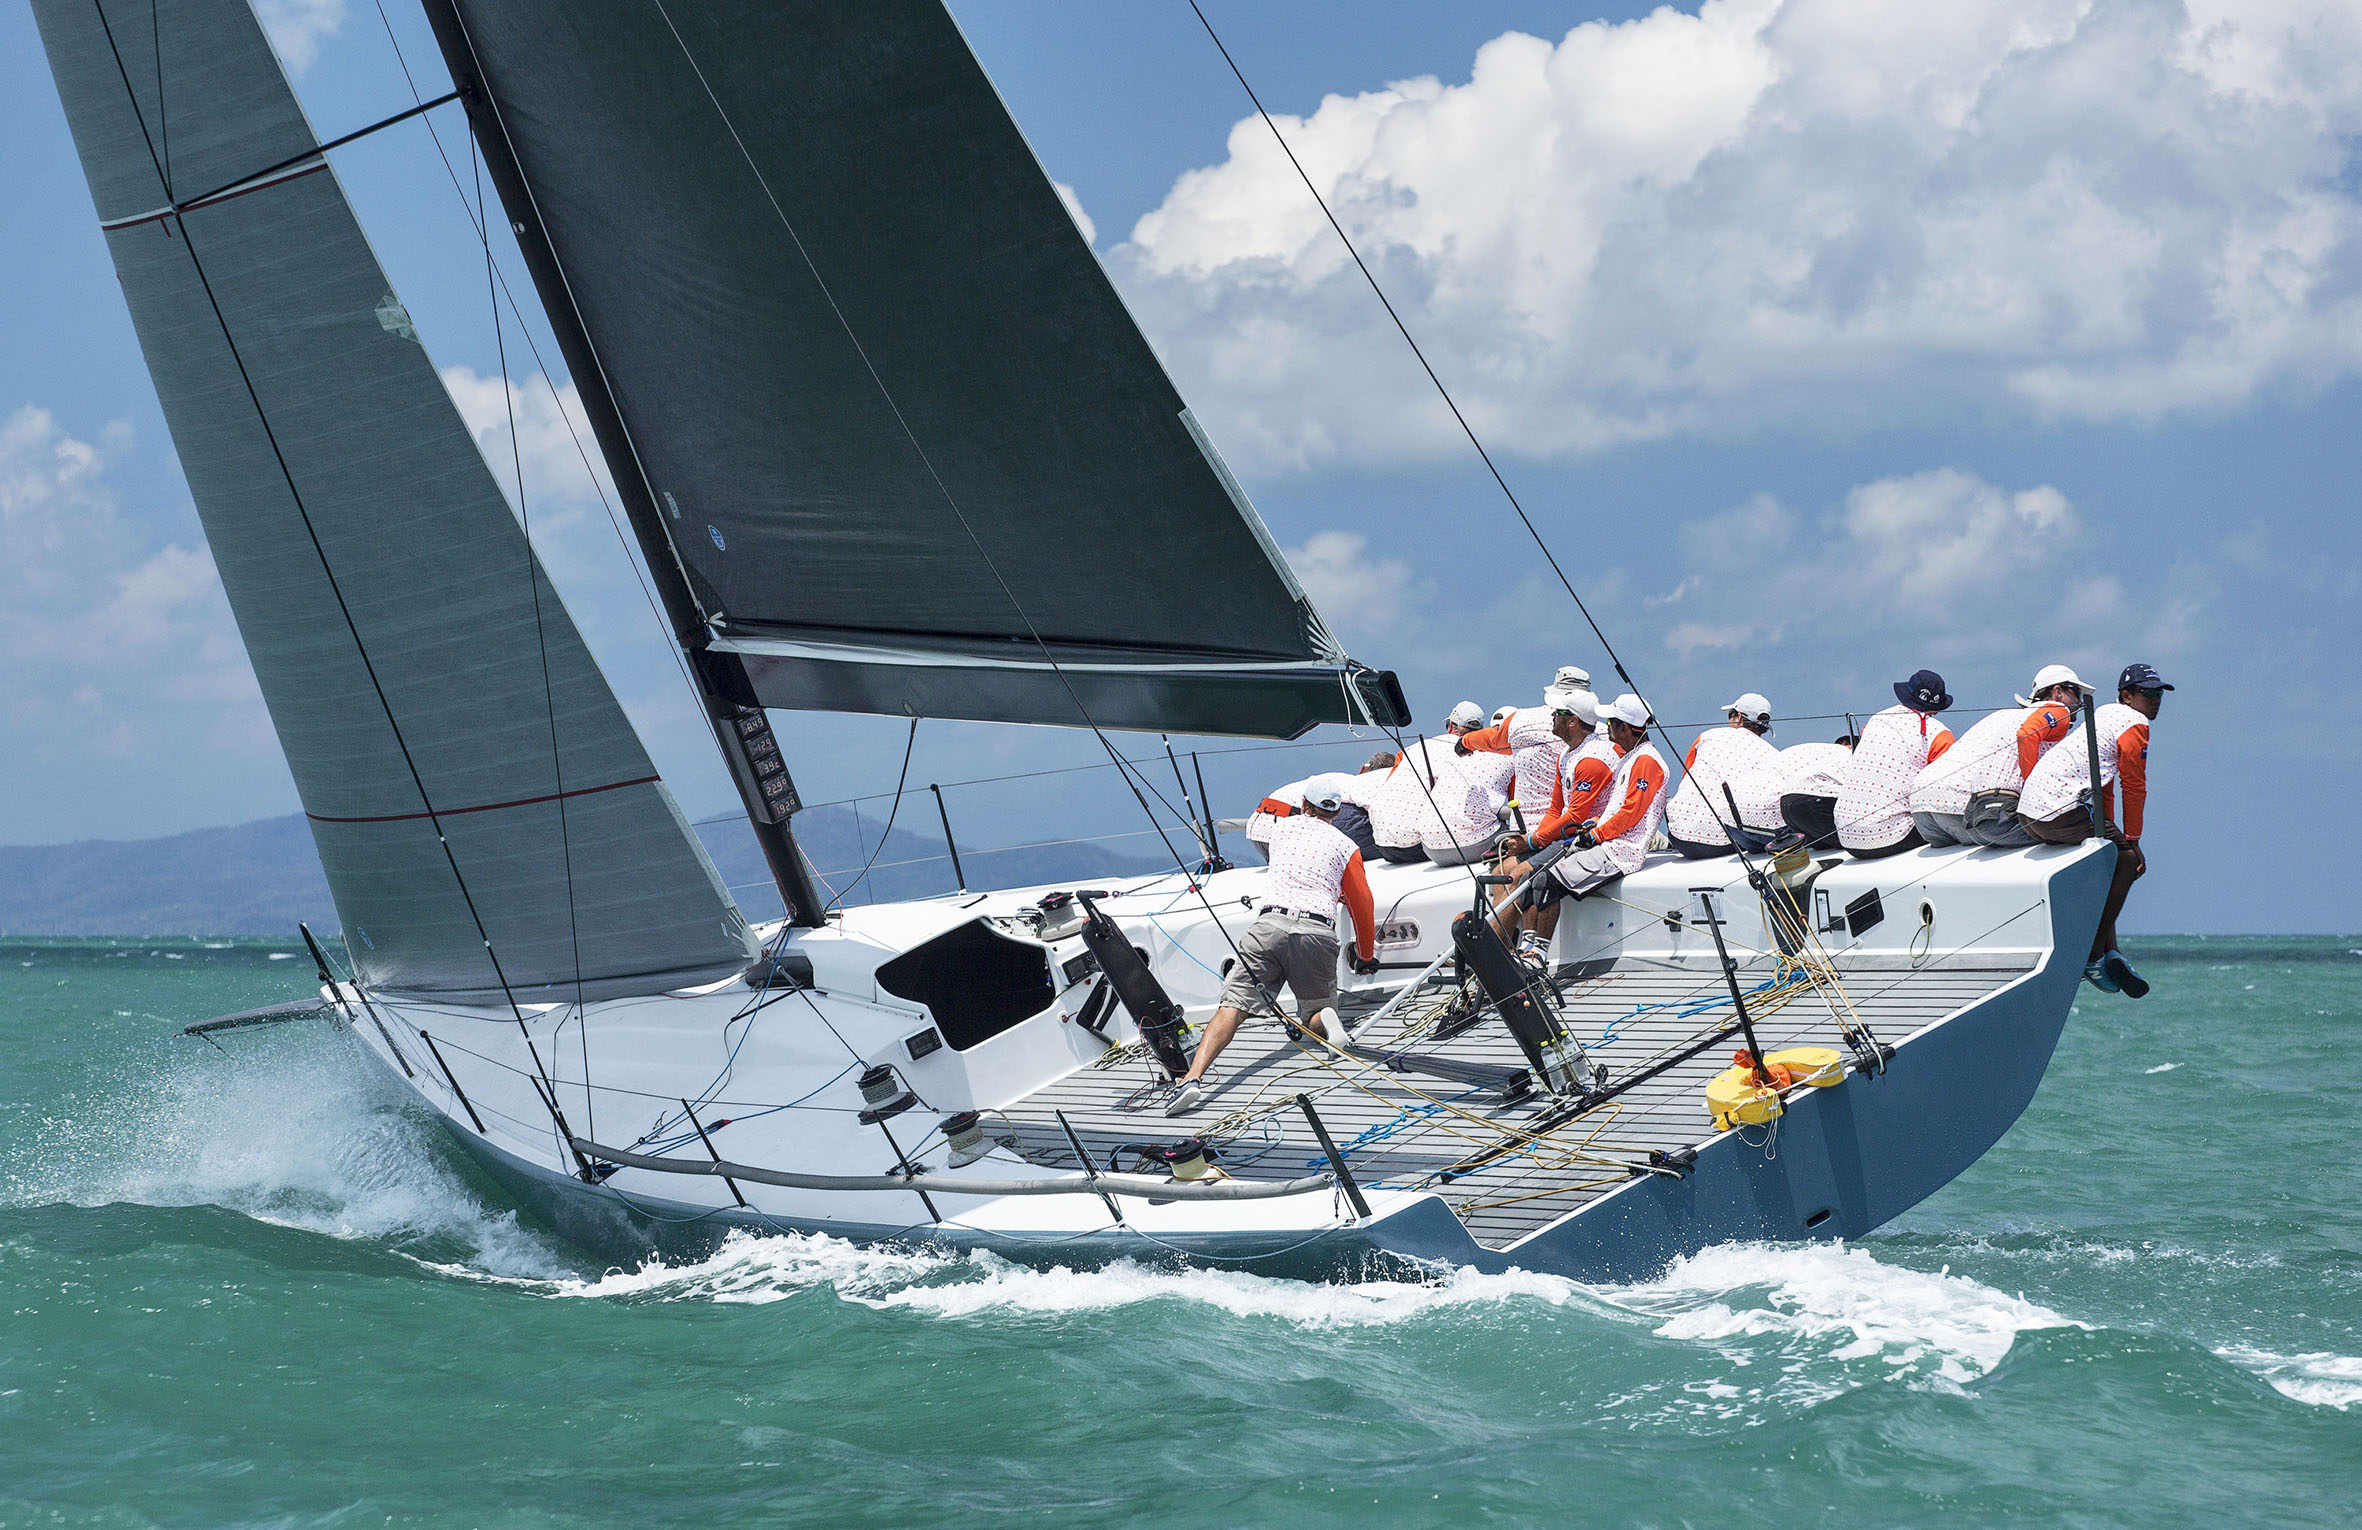 The 2017 Top of the Guf Regatta will sail out of Ocean Marina in Pattaya from May 4-8. (Photo by Guy Nowell)